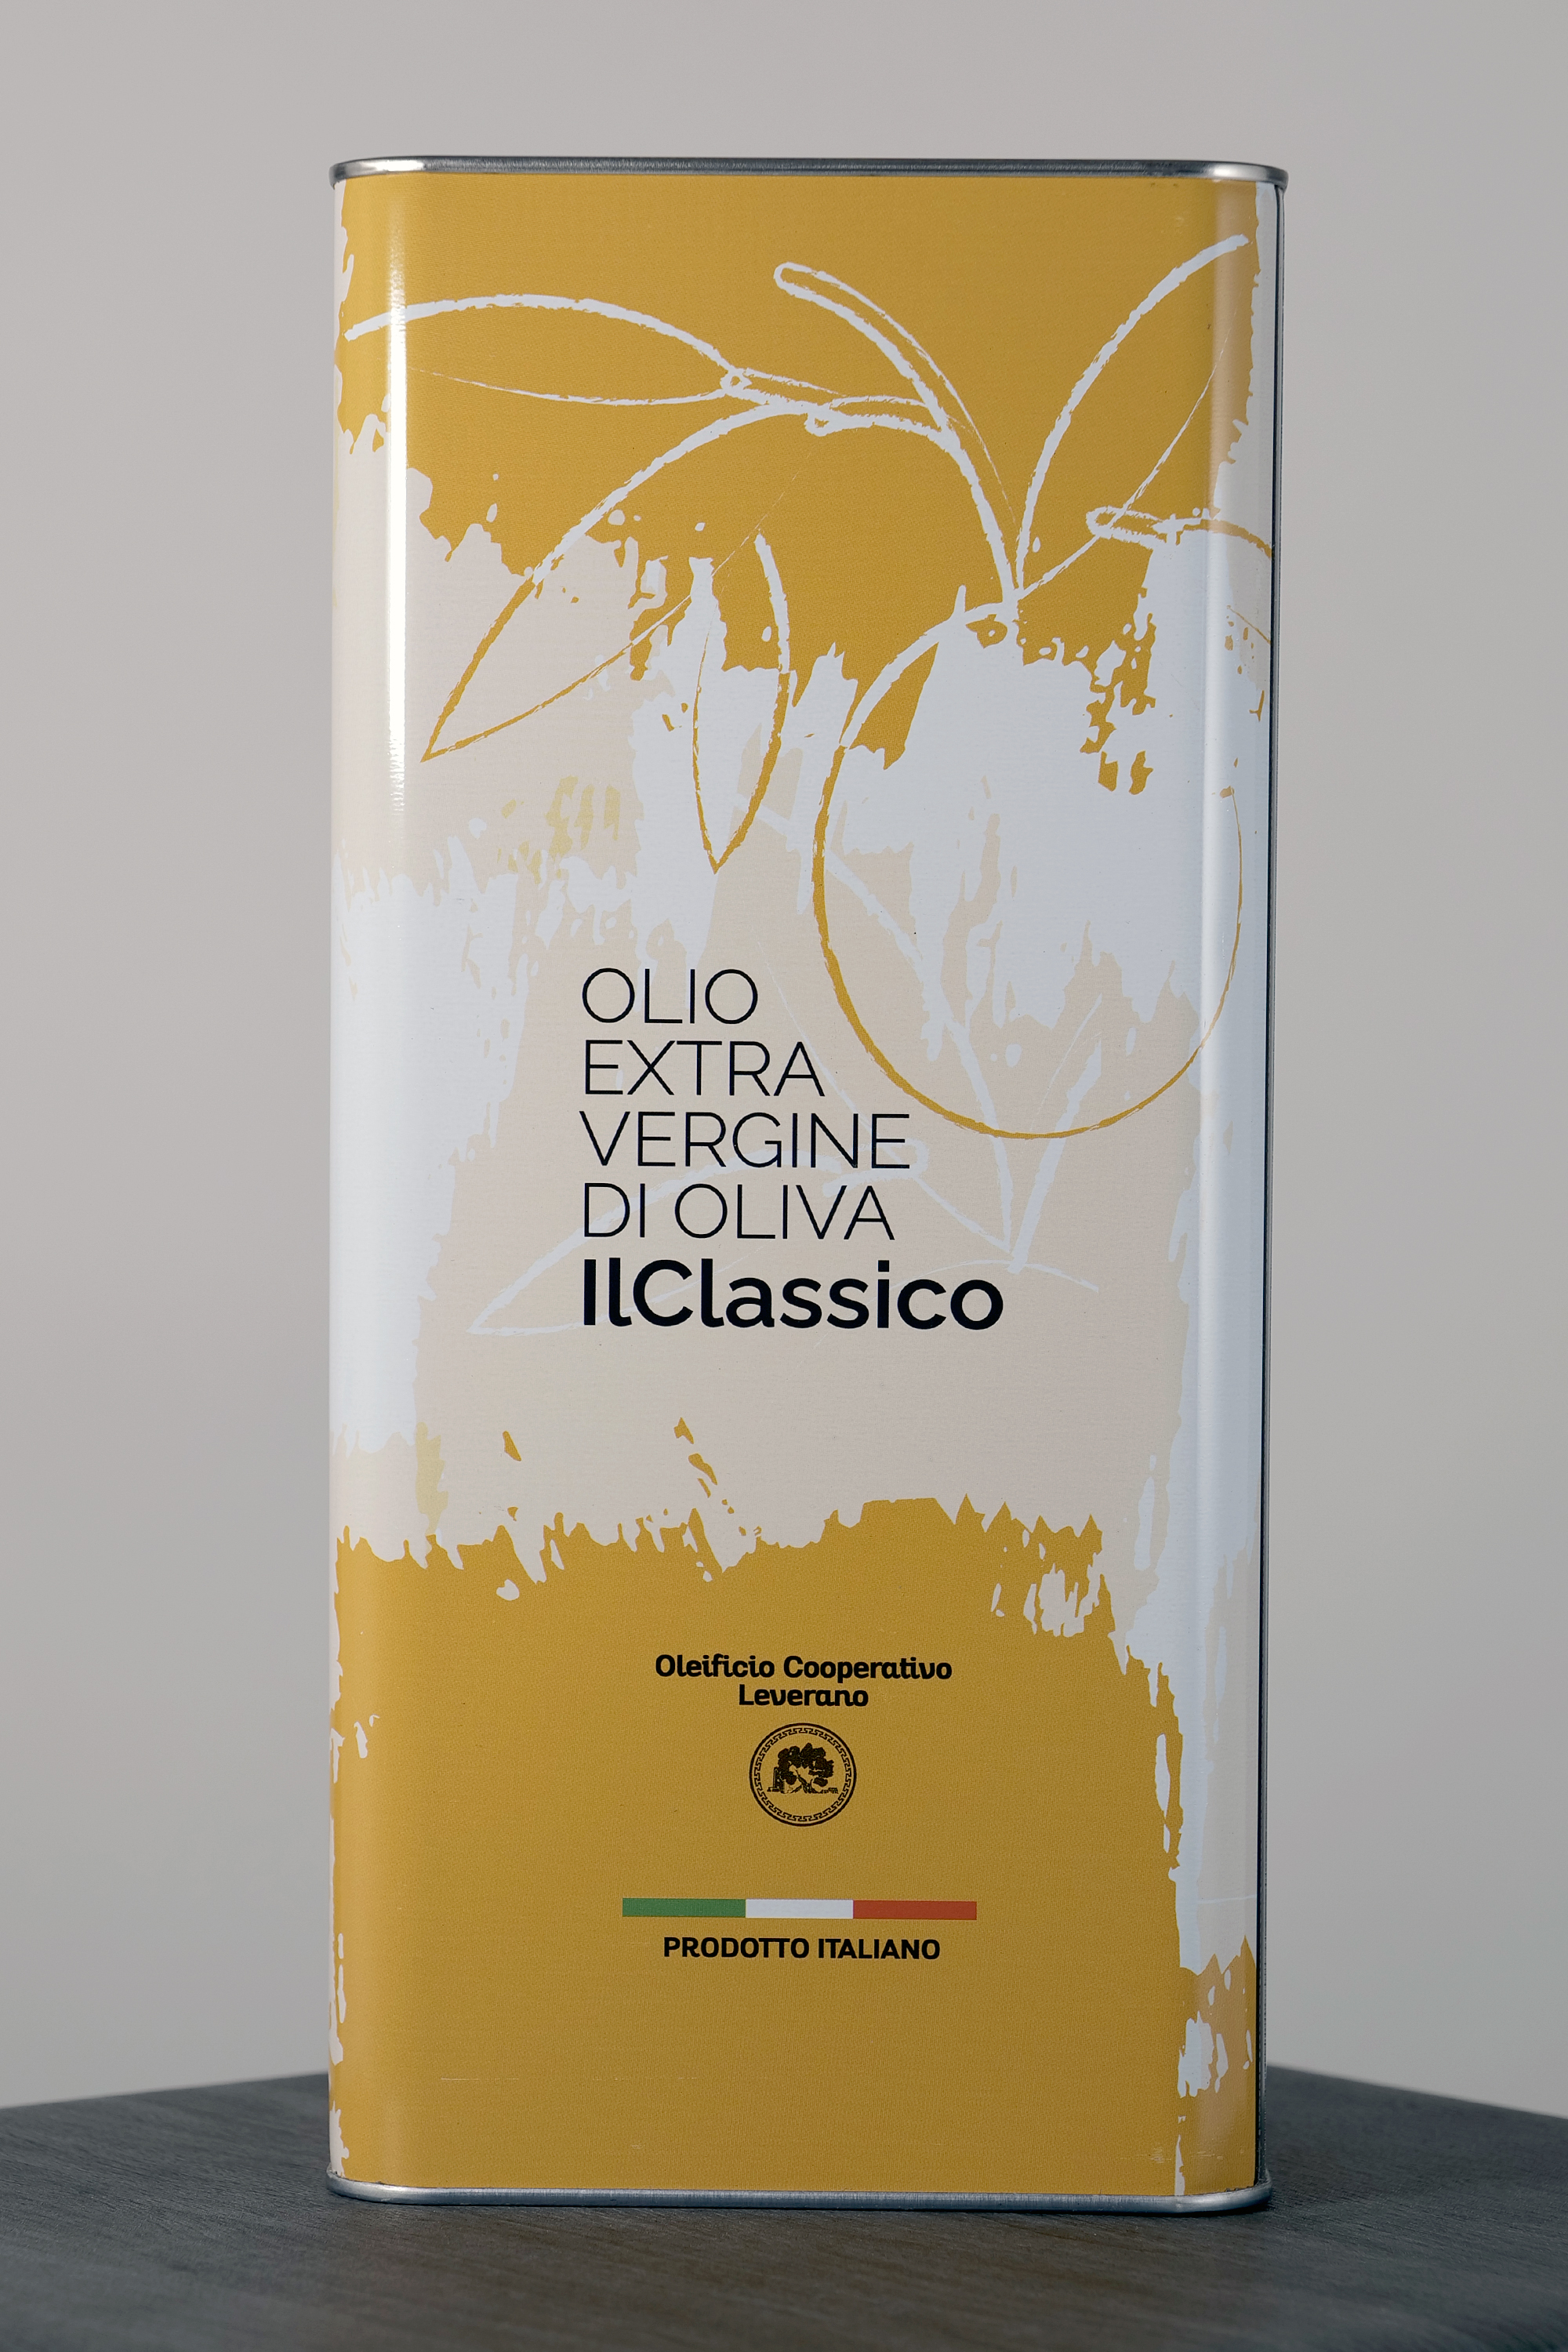 Extra virgin olive oil "IlClassico" - lt. 5,00